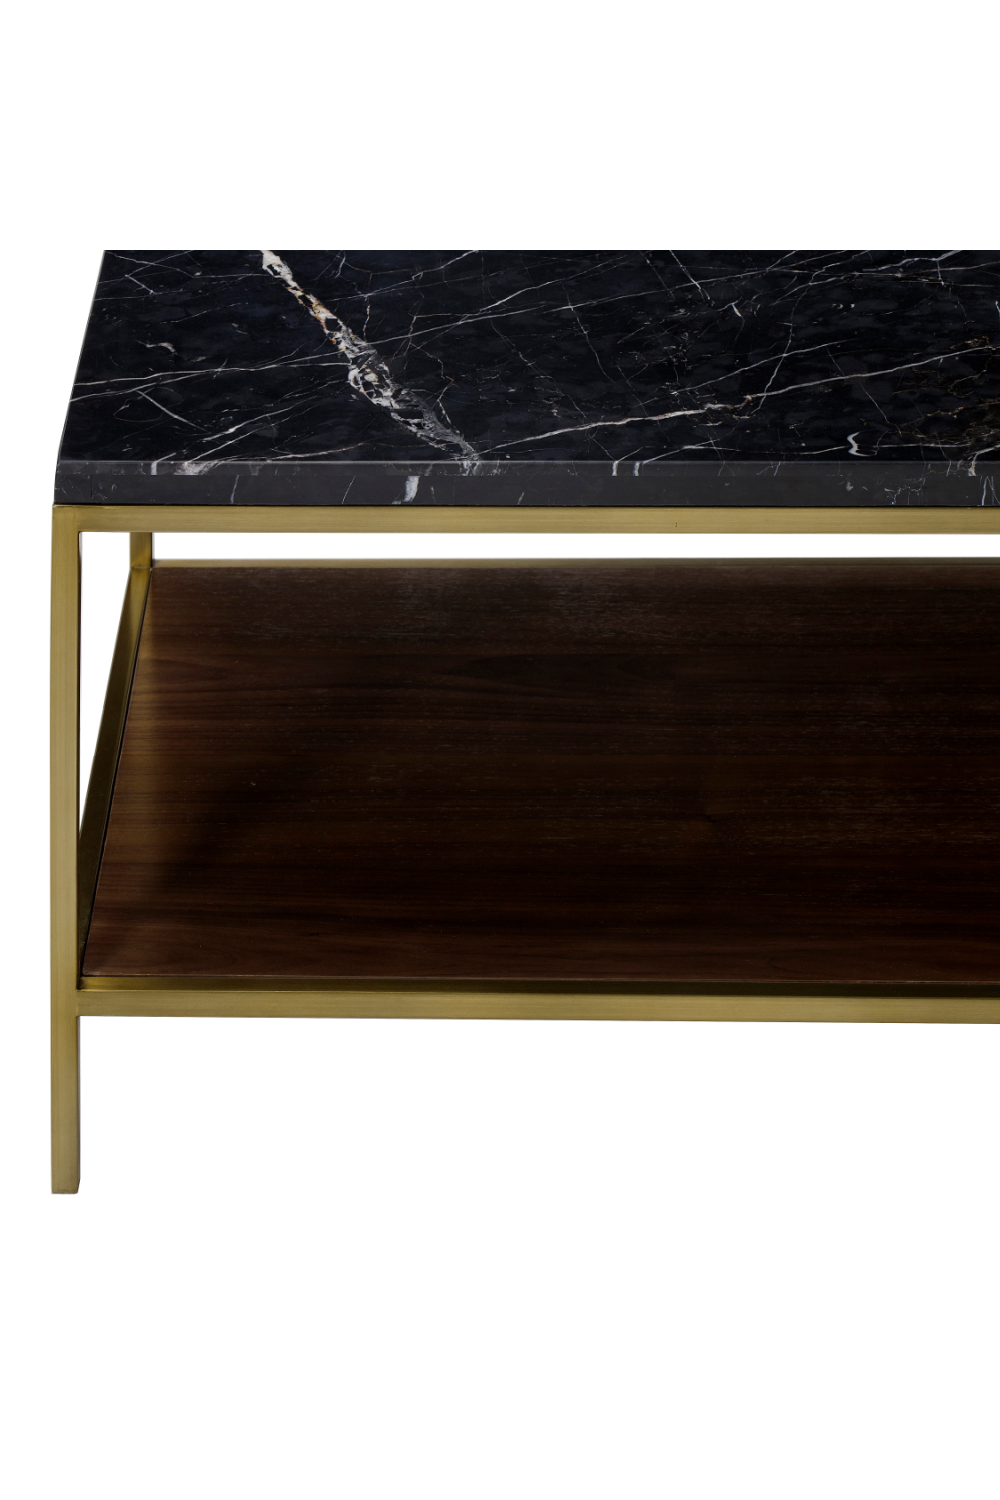 Black Marble Top Coffee Table | Andrew Martin Chester | OROATRADE